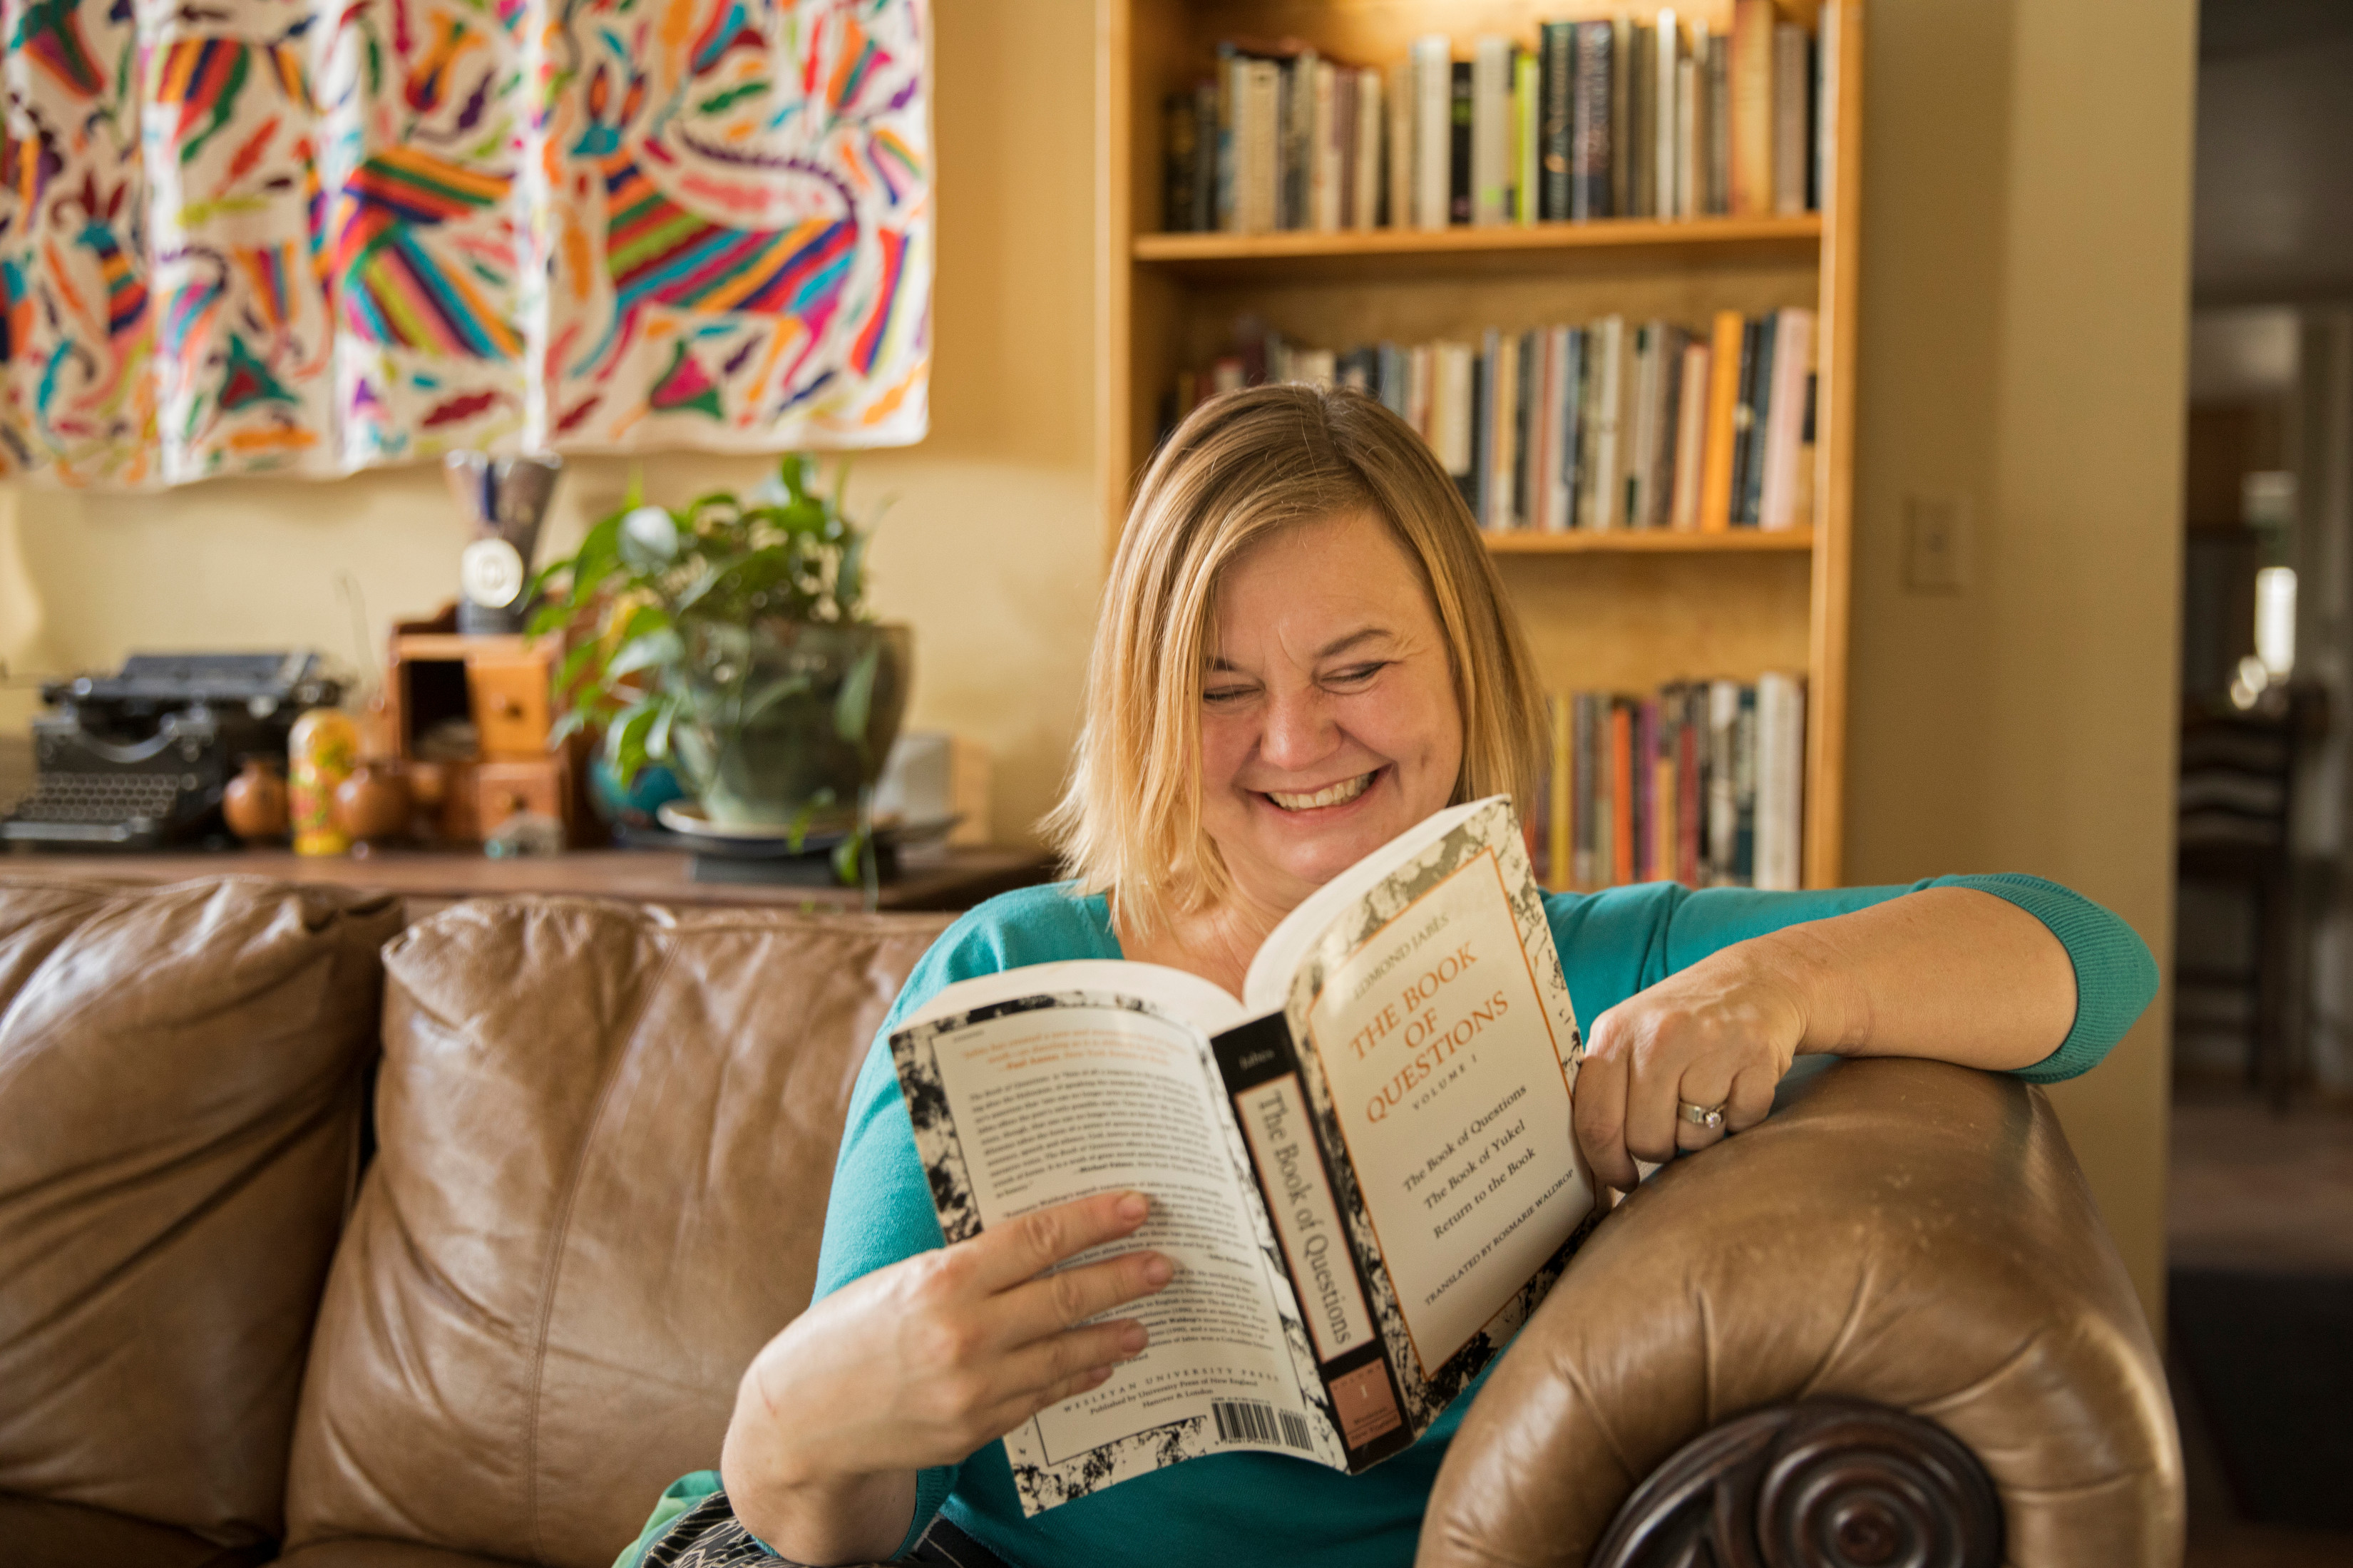 A woman happily reading a book on a couch.